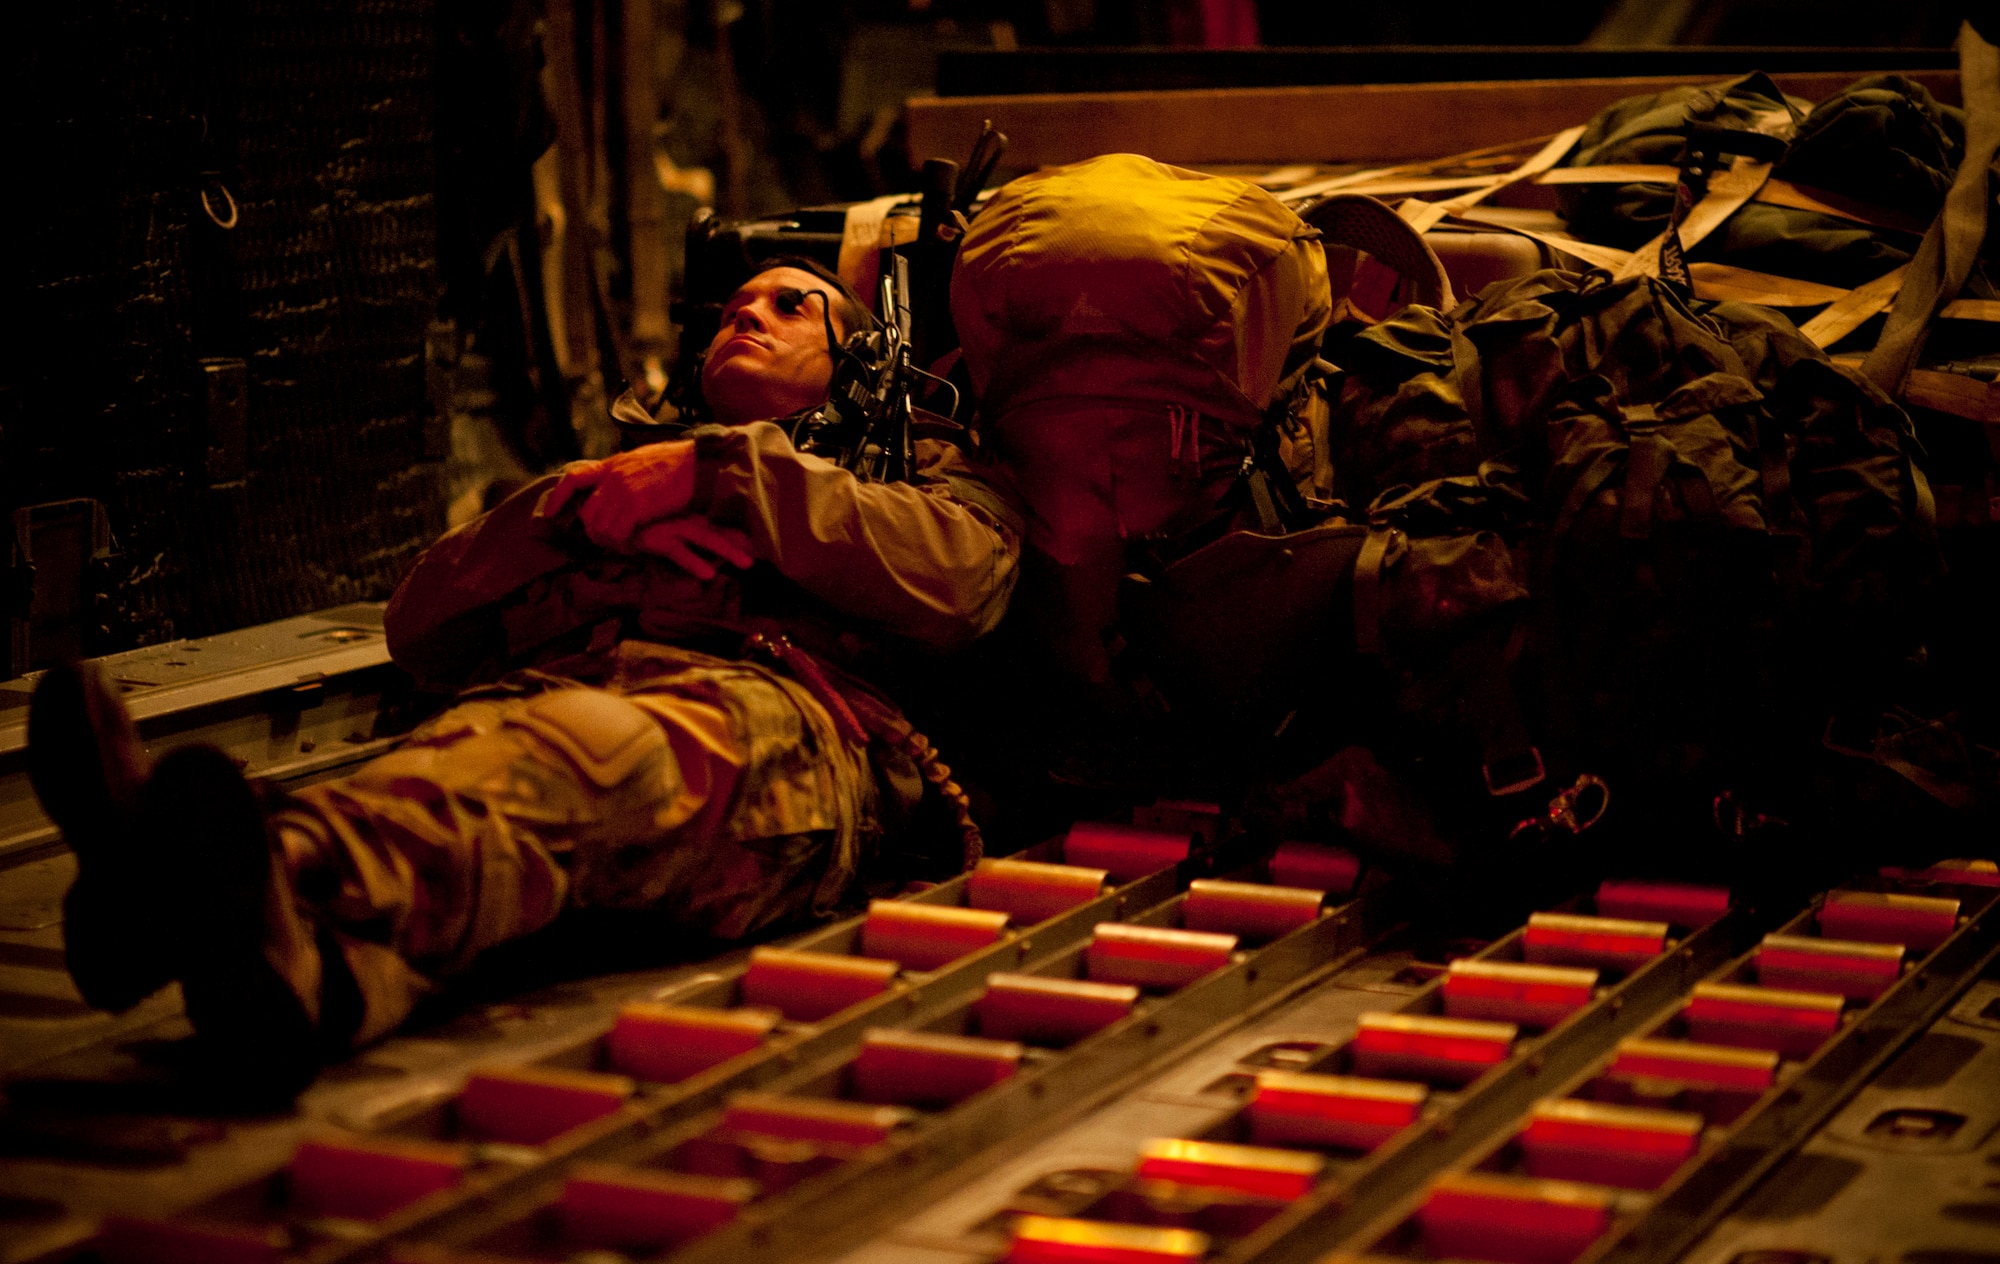 Tech. Sgt. Ray Decker, 320th Special Tactics Squadron special operations weather team, takes a nap on an MC-130P Combat Shadow bound for Sendai Airport March 19. The relatively small squadron currently manages Sendai Airport, meaning squadron members work long hours with little sleep, making downtime like this a welcomed break. The 320th STS is supporting U.S. military efforts to provide assistance to Japan following the March 11 earthquake and tsunami. (U.S. Air Force photo/Staff Sgt. Samuel Morse)